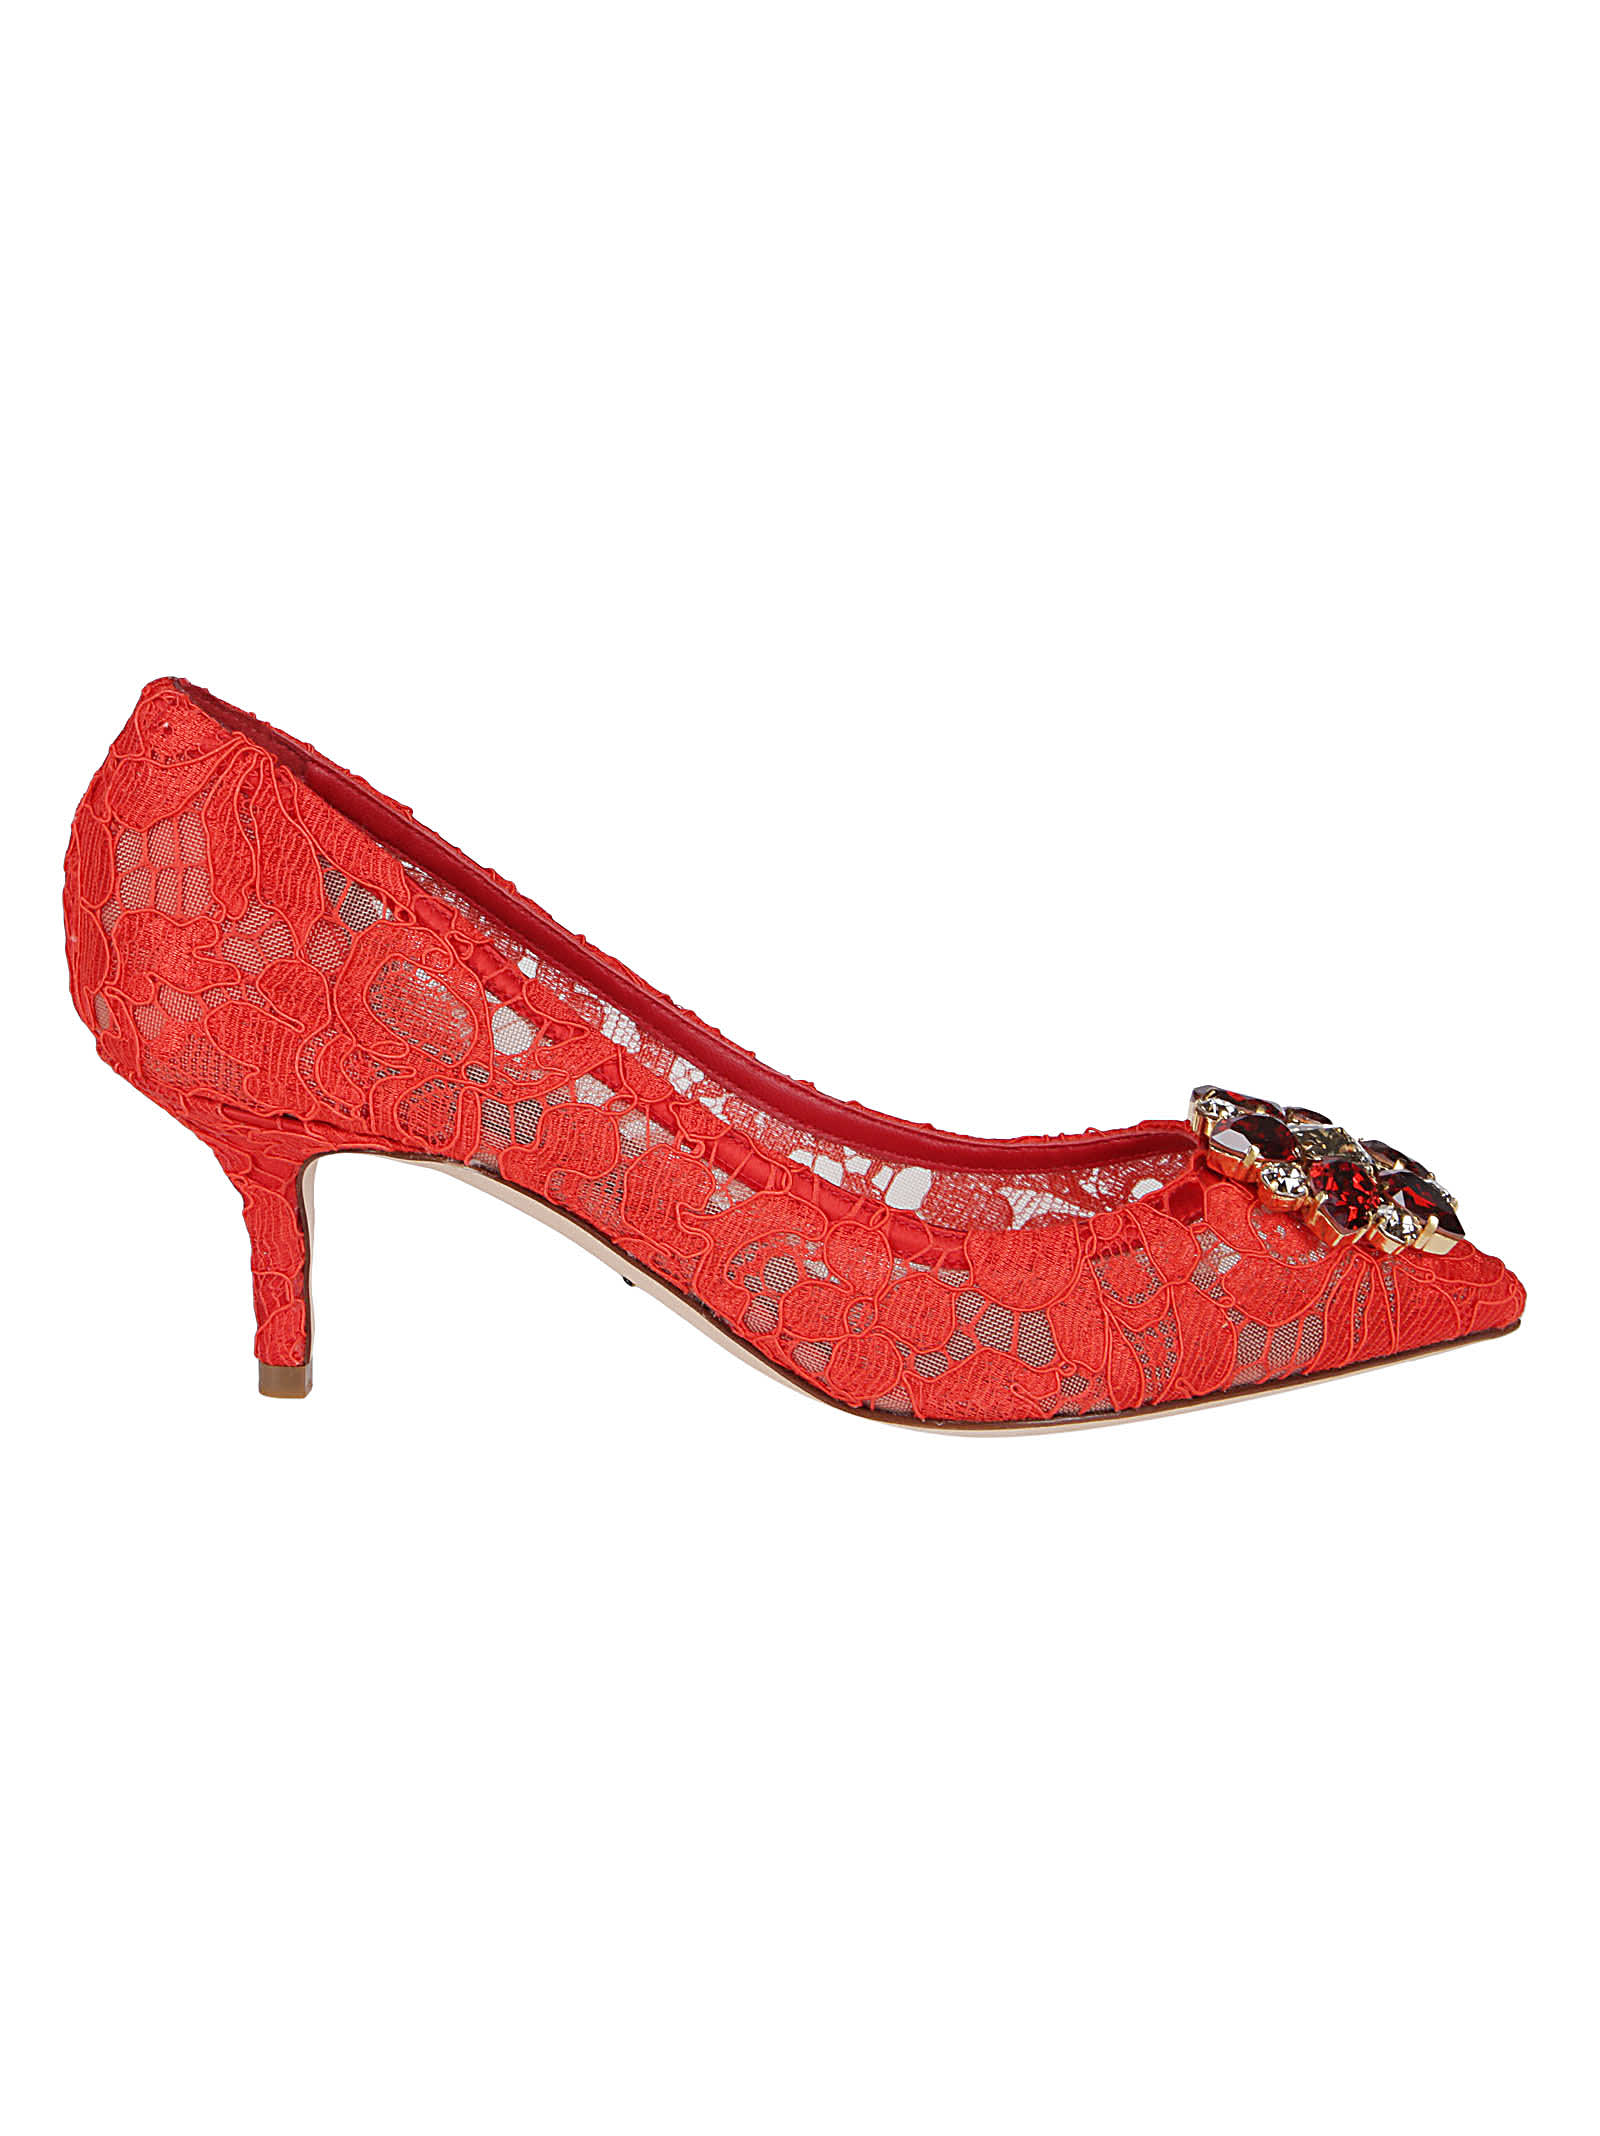 DOLCE & GABBANA RED LACE PUMPS,11822817